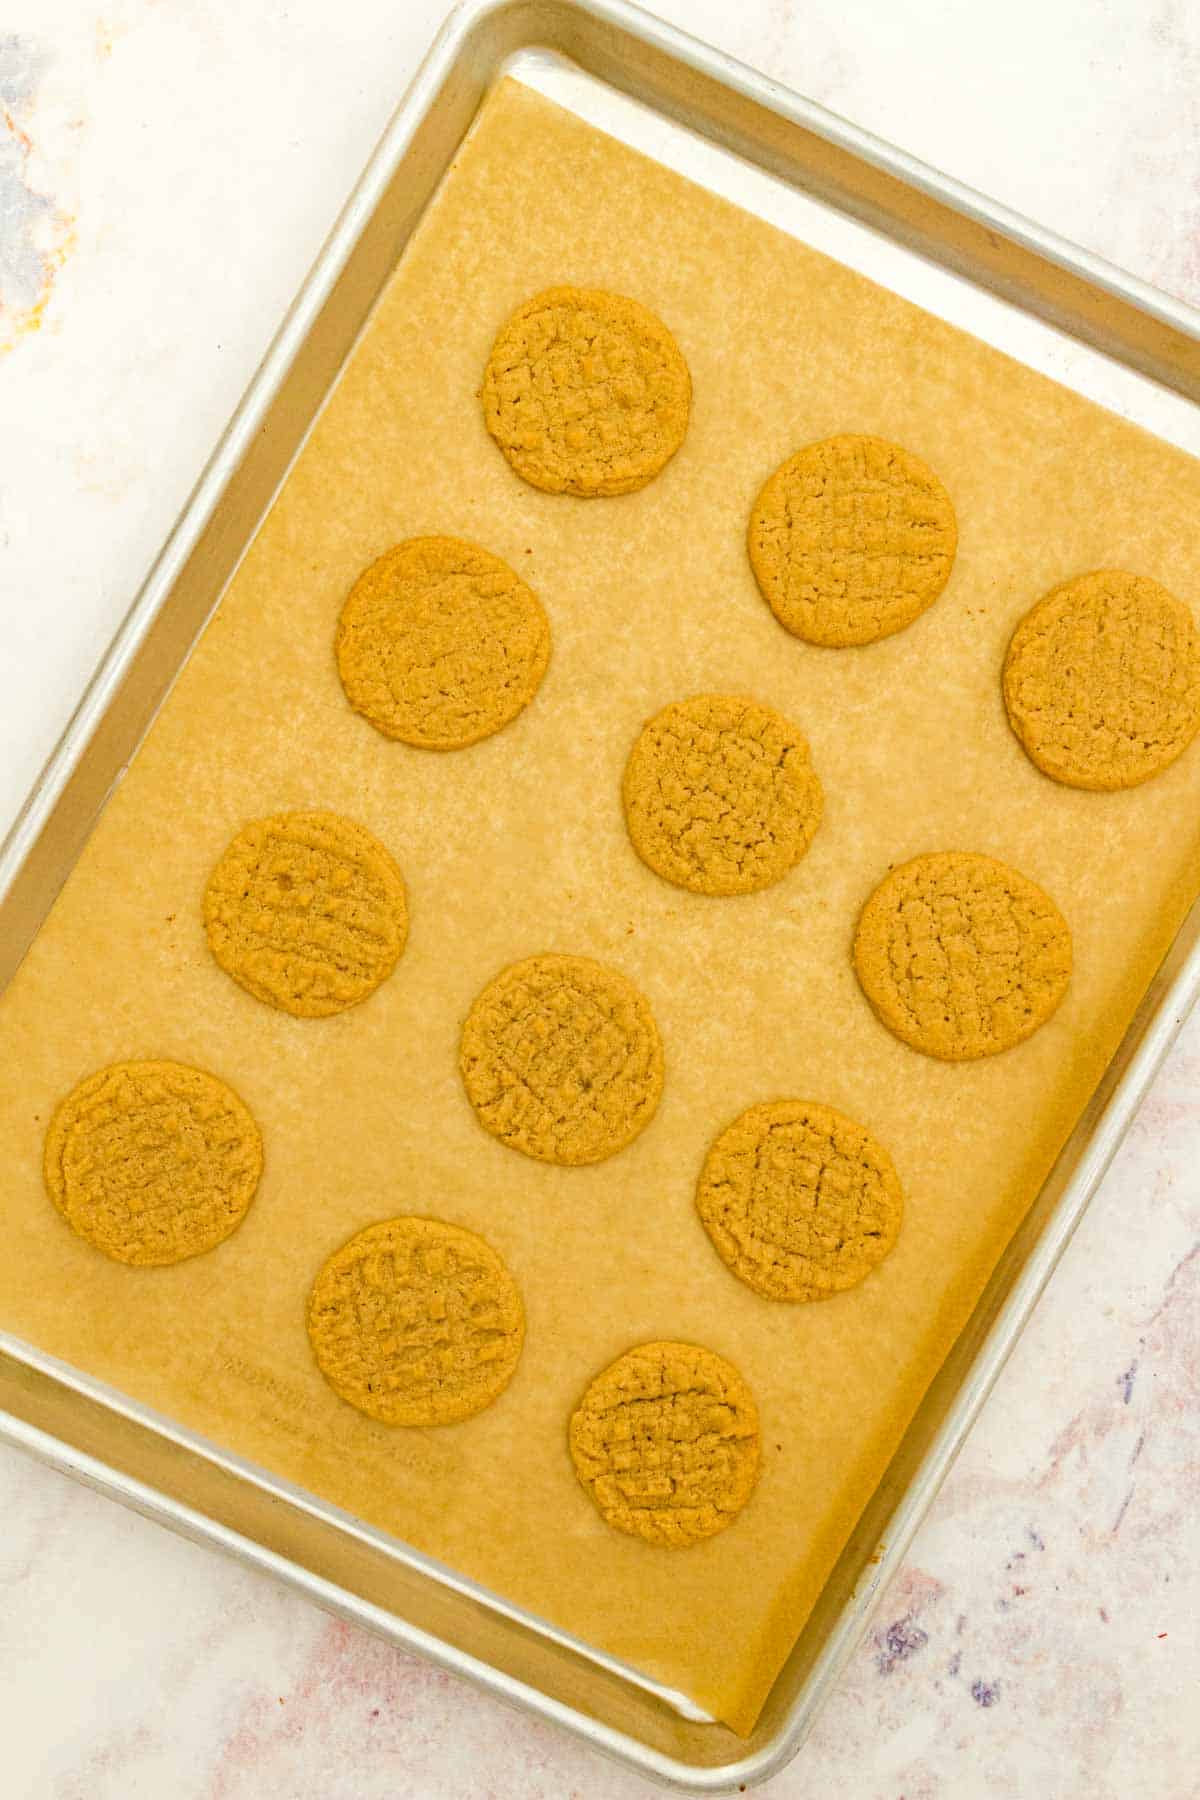 Baked gluten-free peanut butter cookies on a parchment-lined baking sheet.